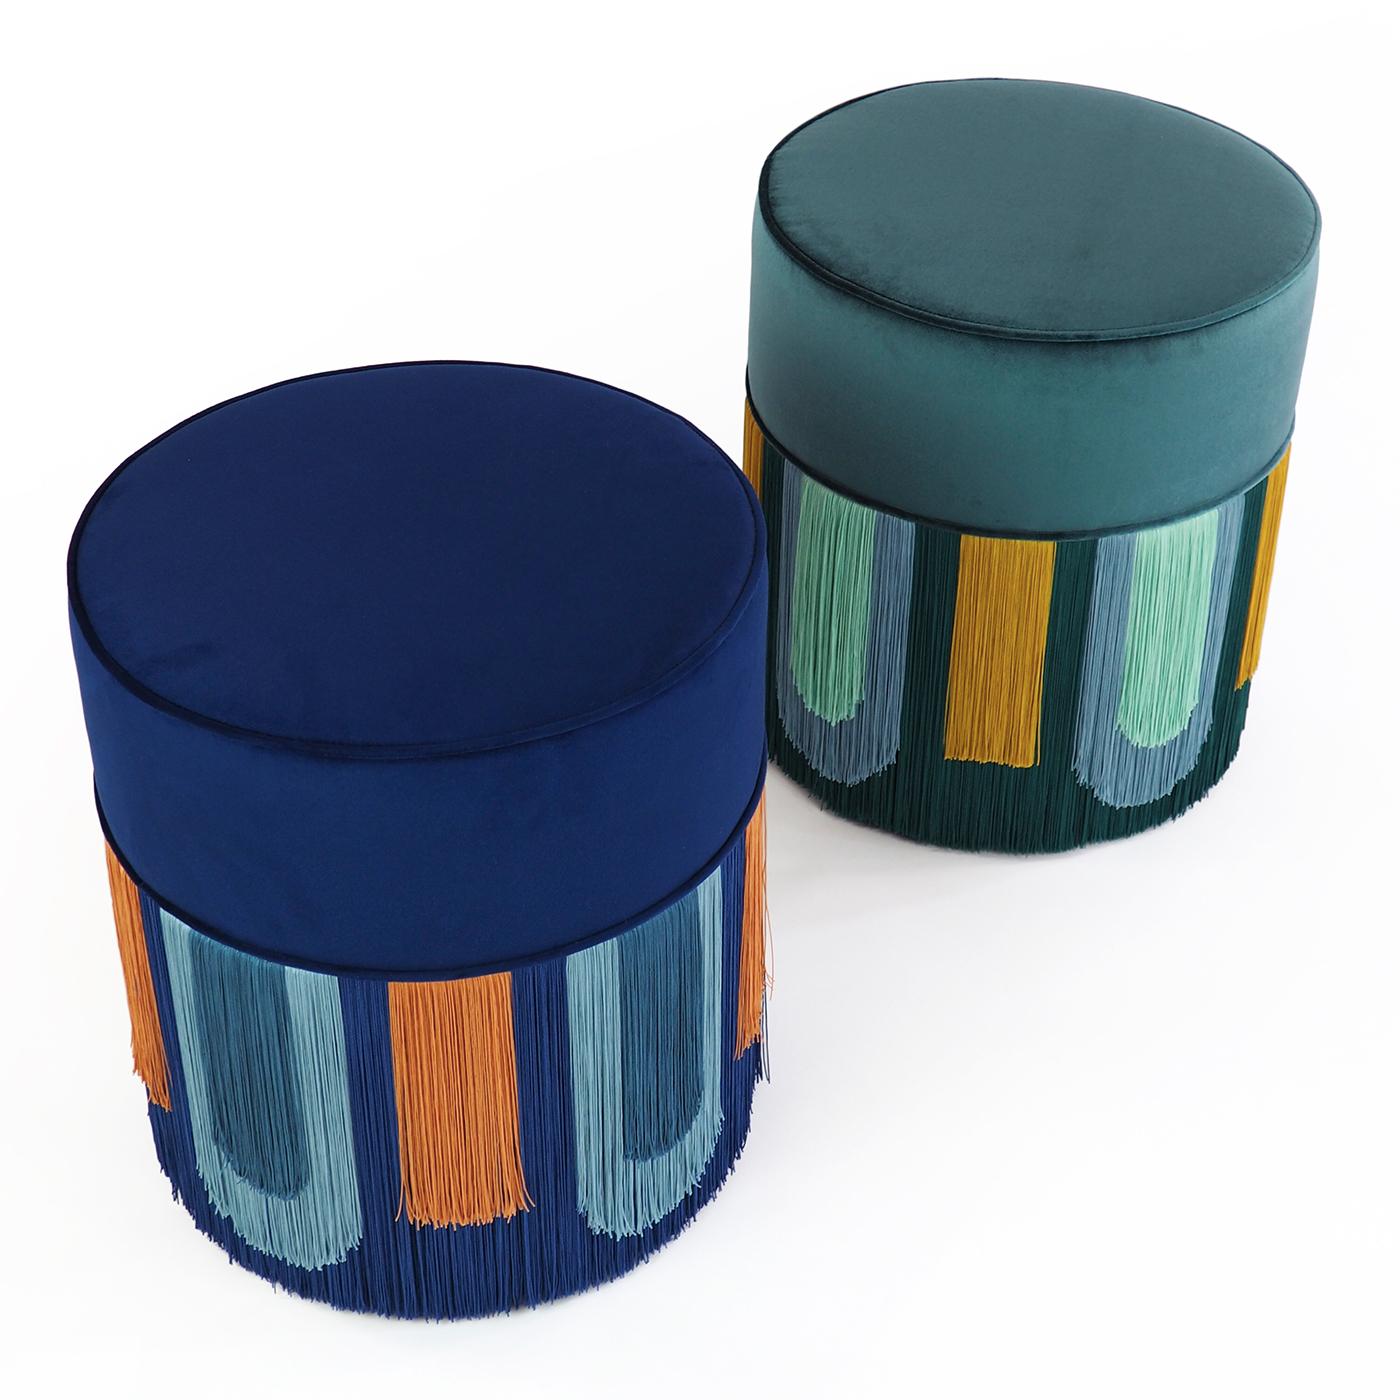 Part of a series of elegant ottomans inspired by the luxurious flair of Art Deco style, this ottoman will be a precious addition to a modern interior, providing extra seating or a stylish footrest. Luxurious velvet fabric defines the piece, the top